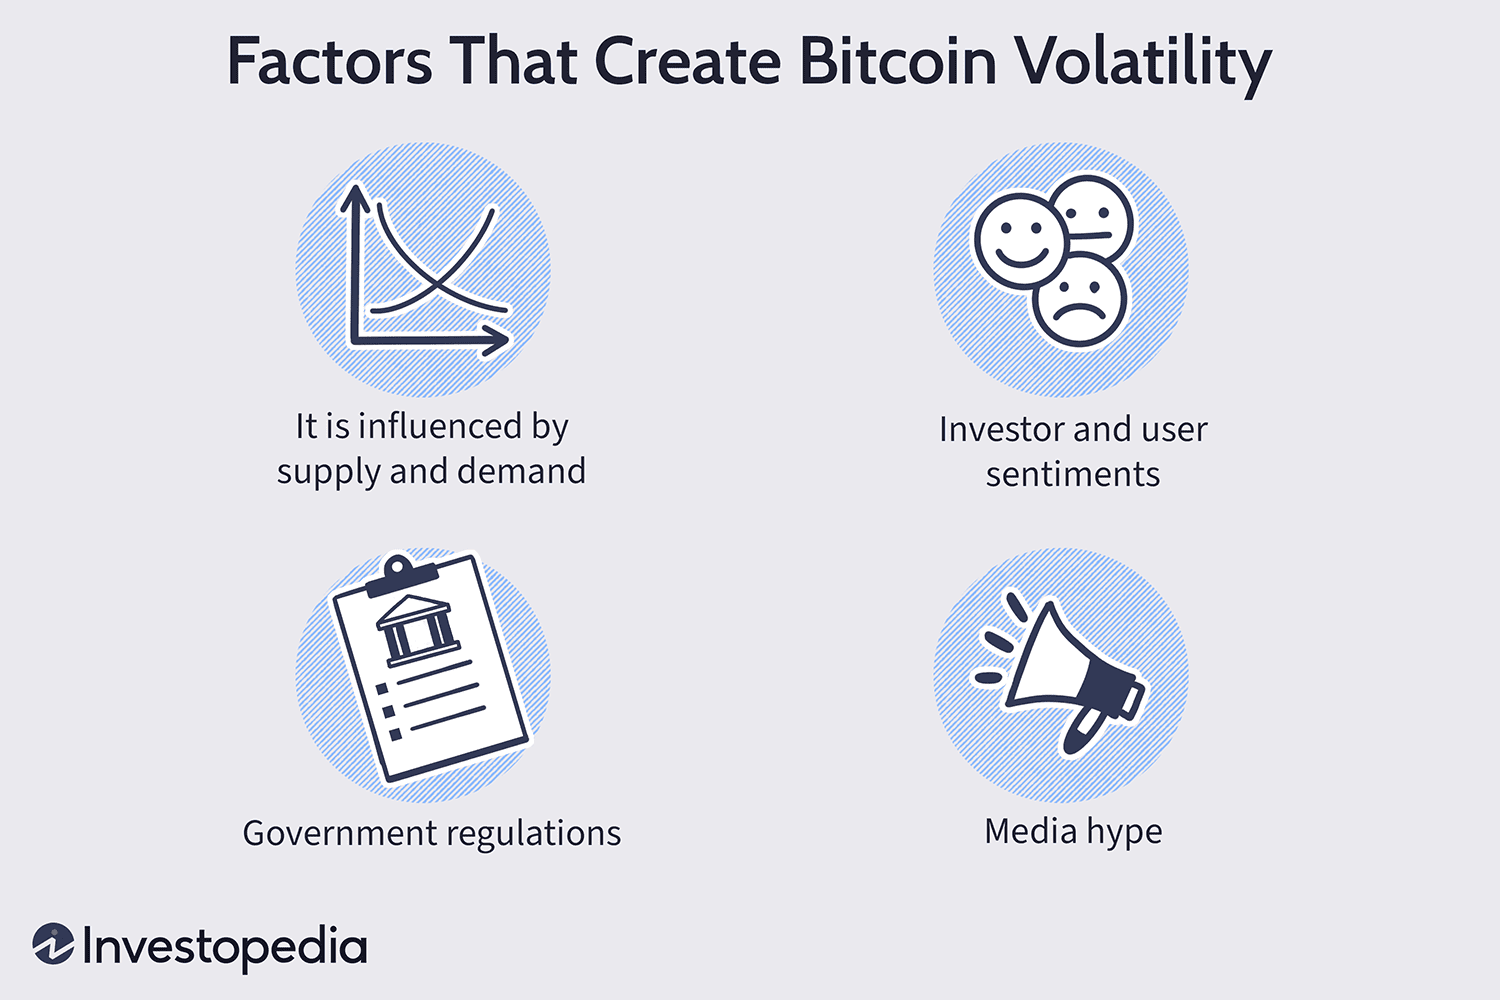 Why Bitcoin is Volatile